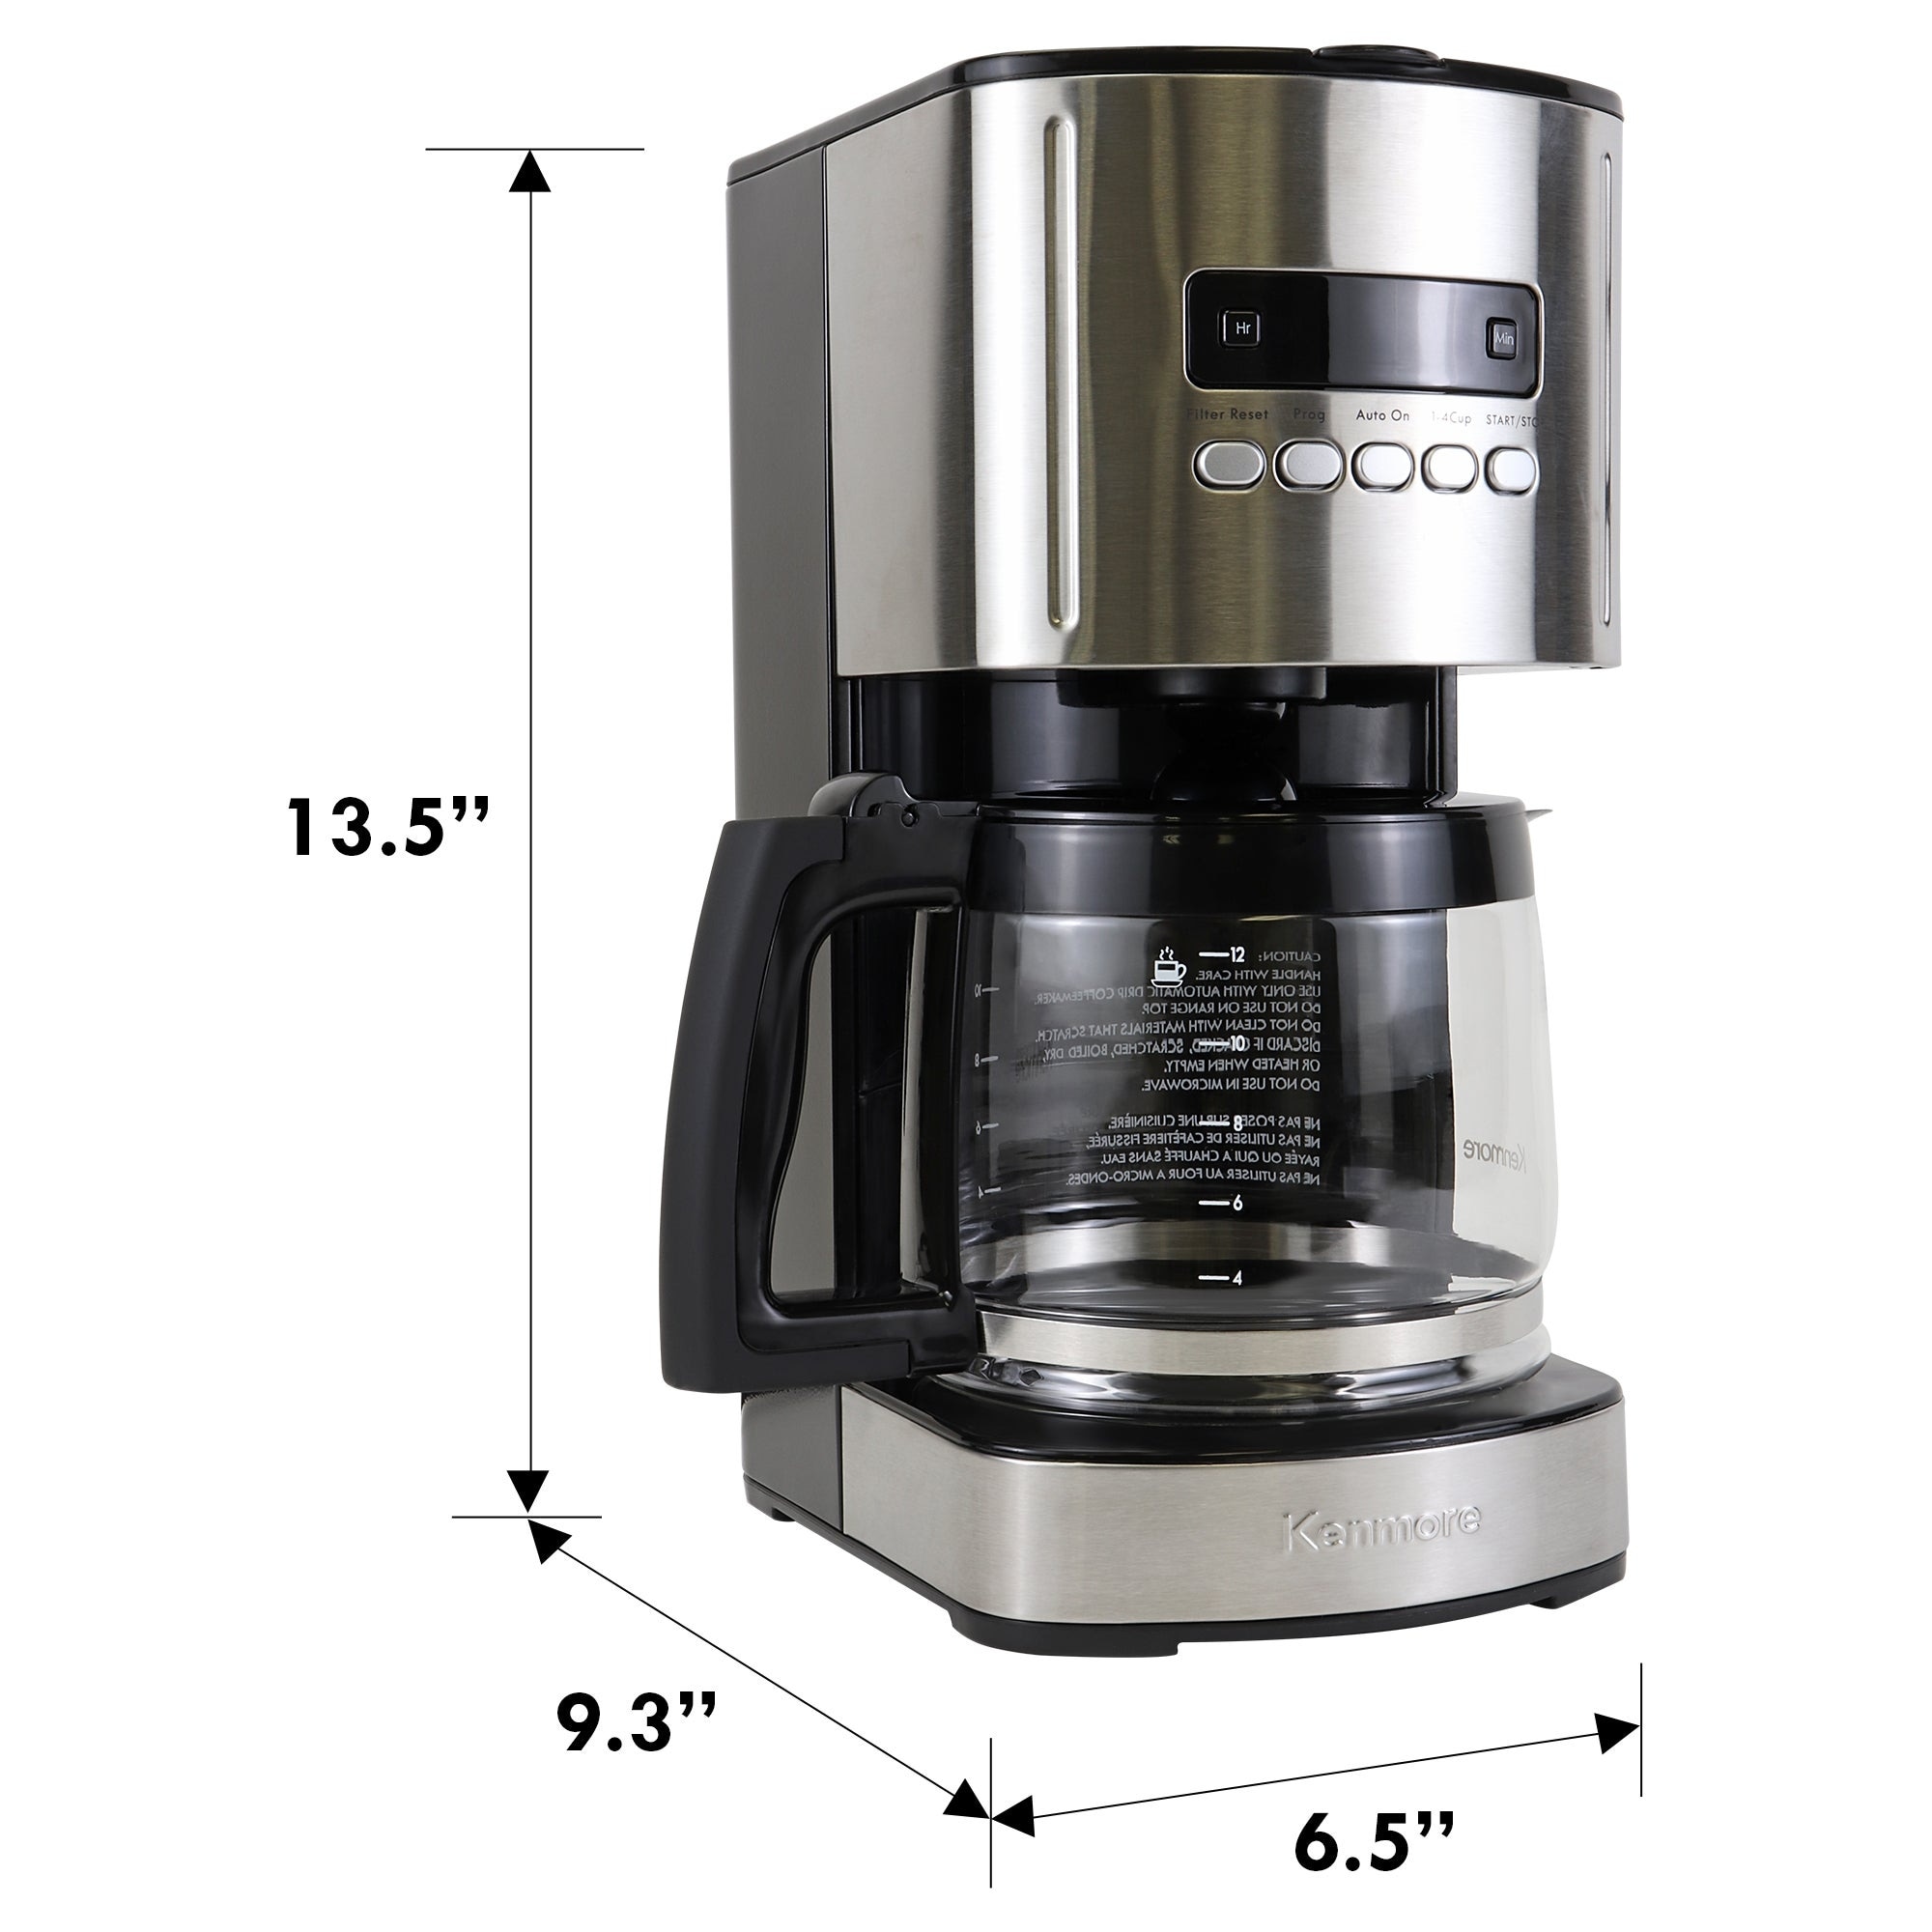 https://ak1.ostkcdn.com/images/products/is/images/direct/ac5dfd53aa5e808fae3eb5a293e1ebca227cabb9/Kenmore-Programmable-12-cup-Coffee-Maker%2C-Black-and-Stainless-Steel.jpg